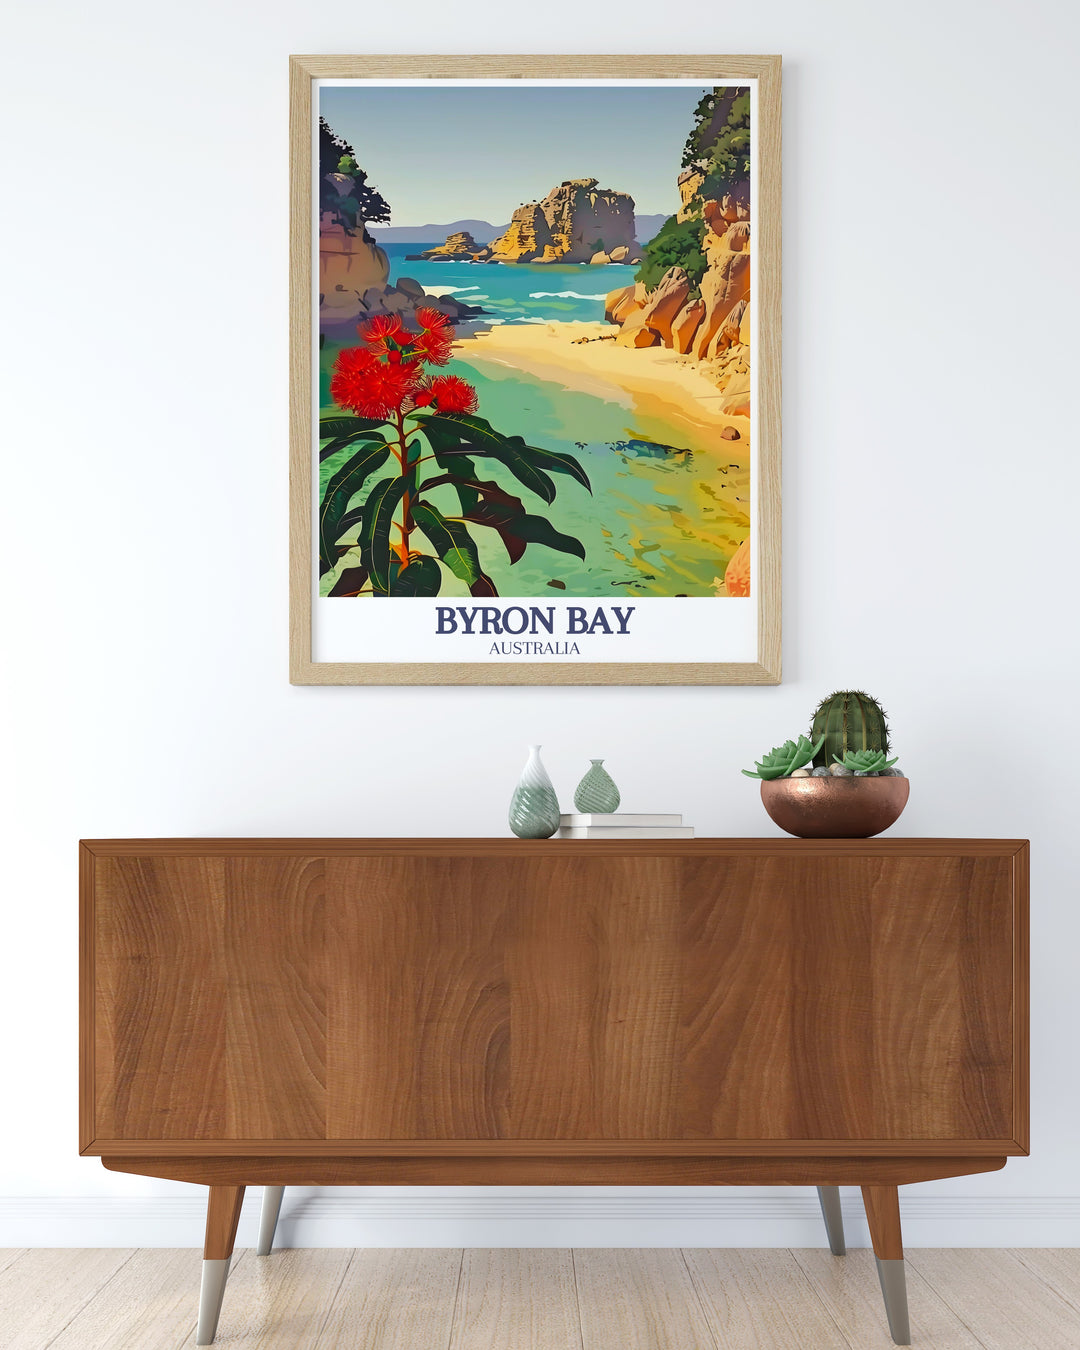 Byron Bay Decor featuring The Pass, Byron beach ideal for living rooms or offices. This art print brings the iconic views of Byron Bay into your space creating a captivating focal point.